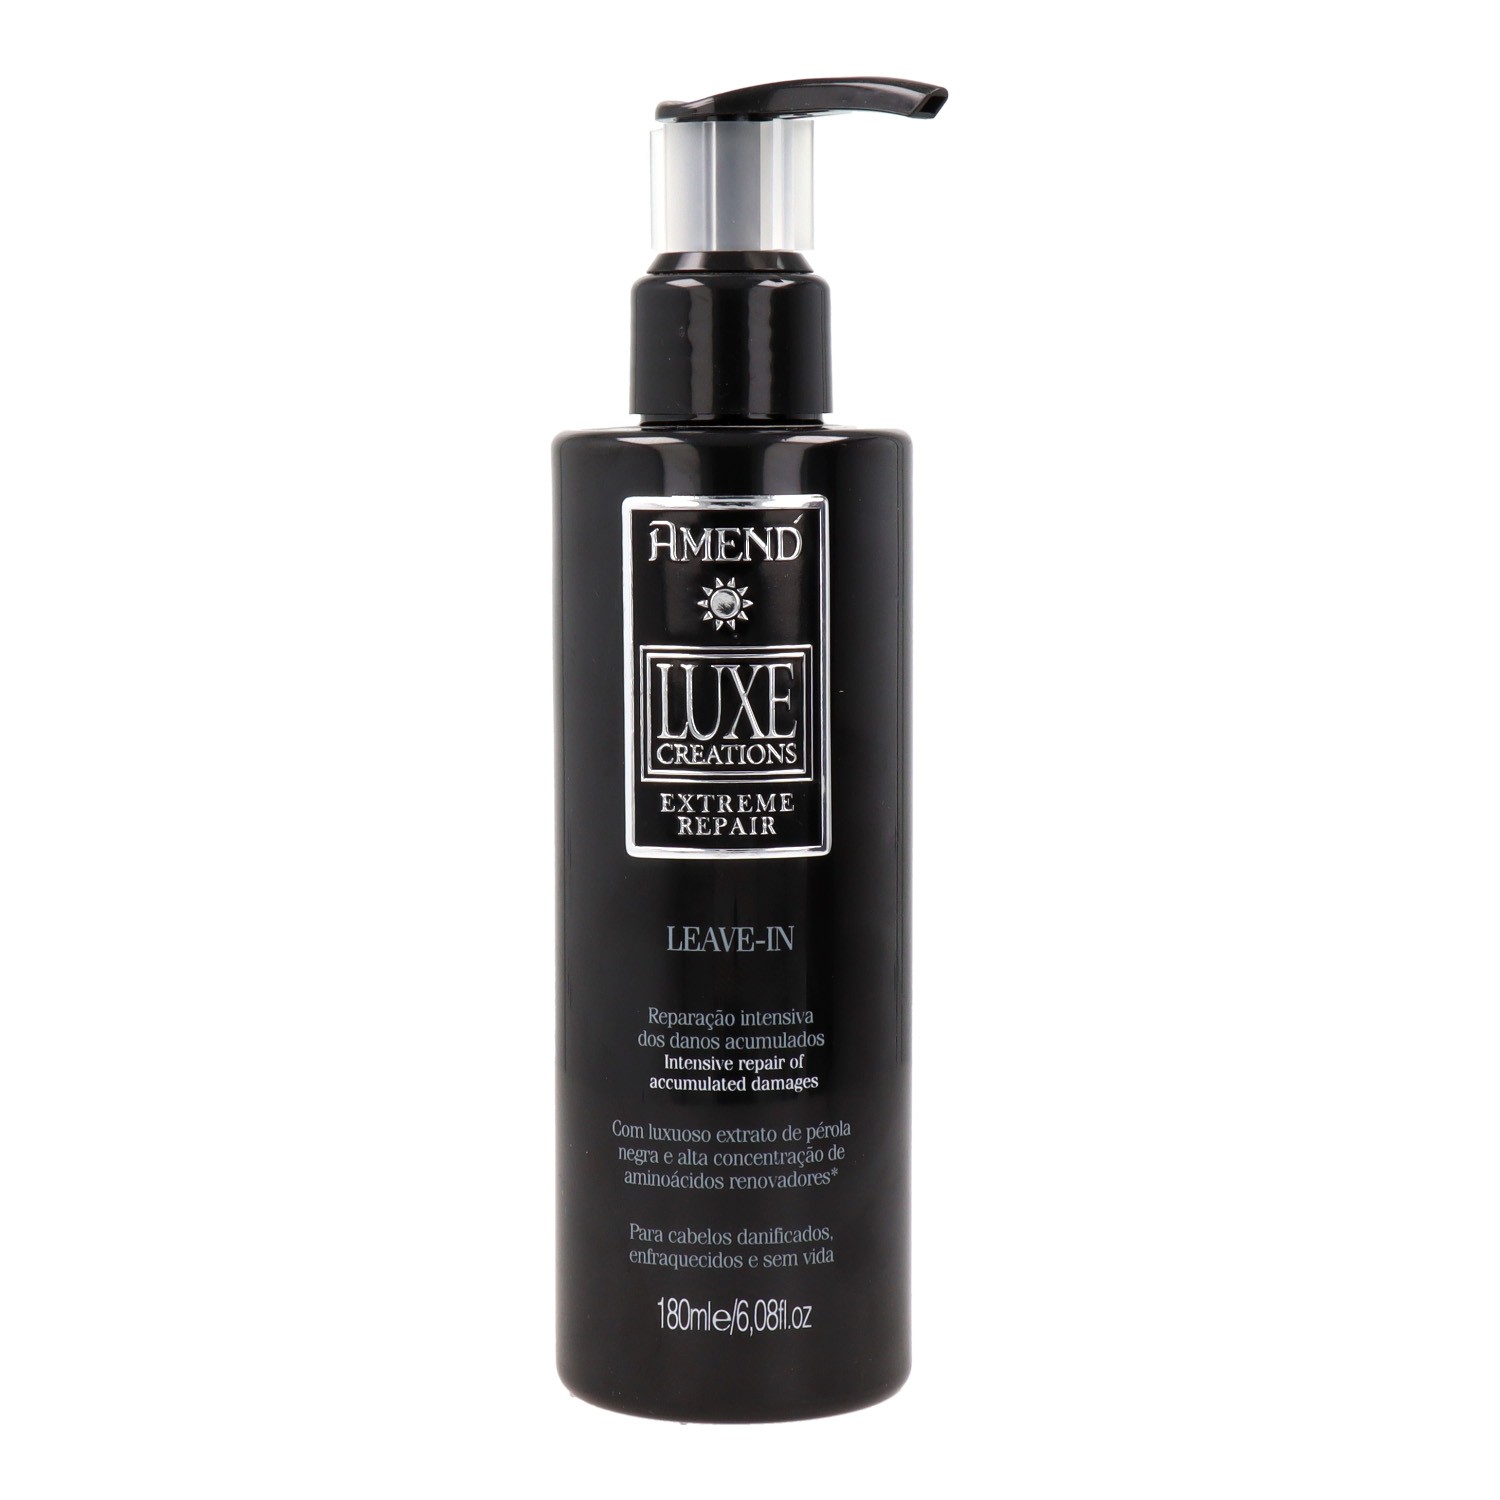 Amend Luxe Creations Extreme Repair Leave-In 180 g